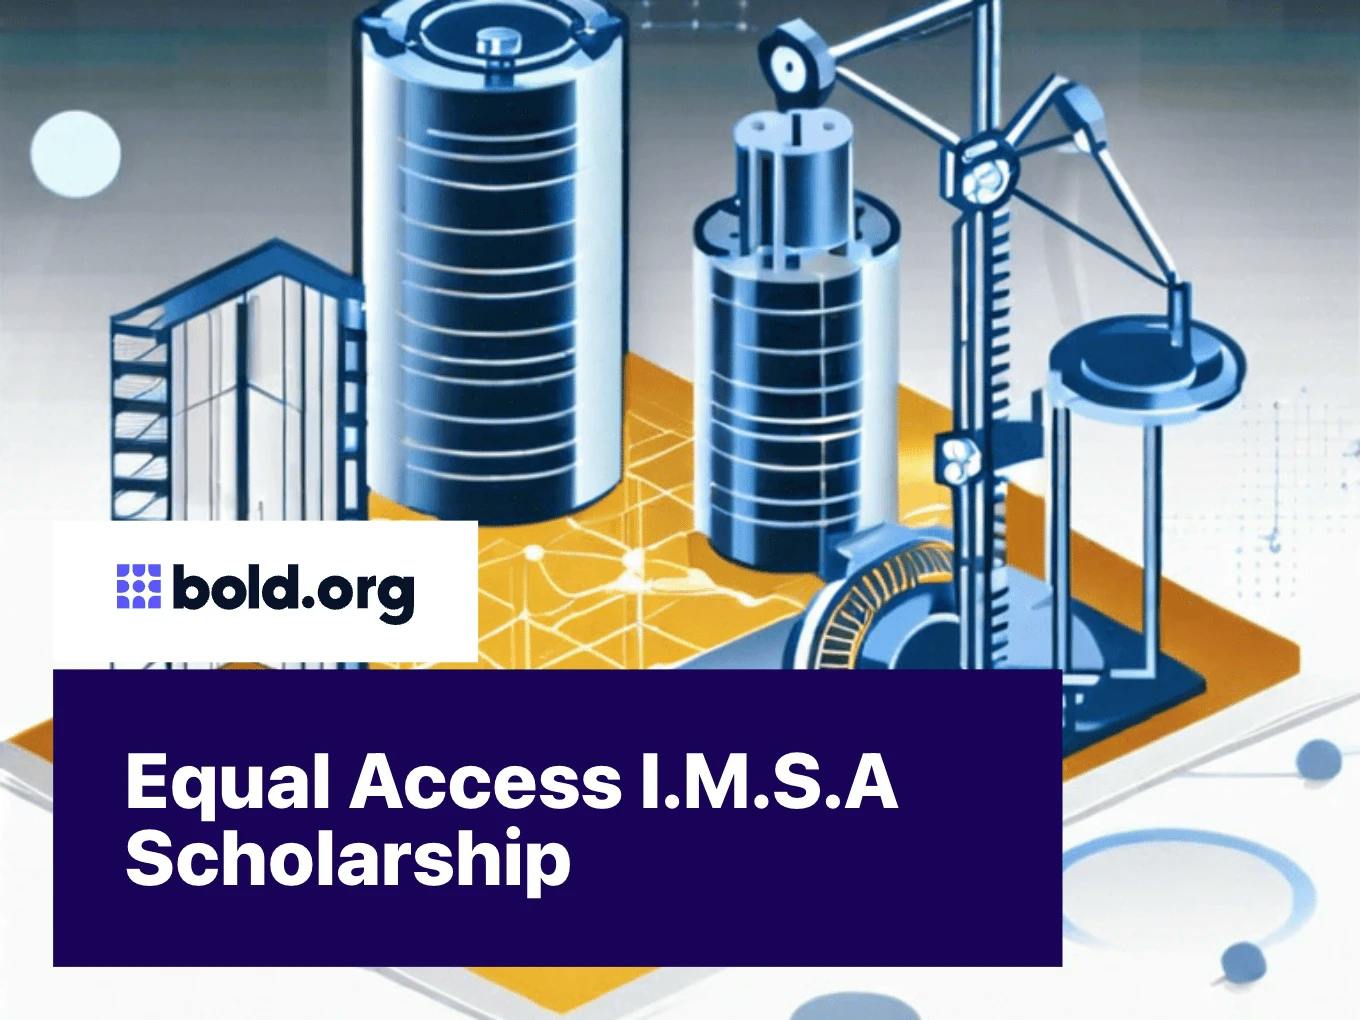 Equal Access I.M.S.A Scholarship